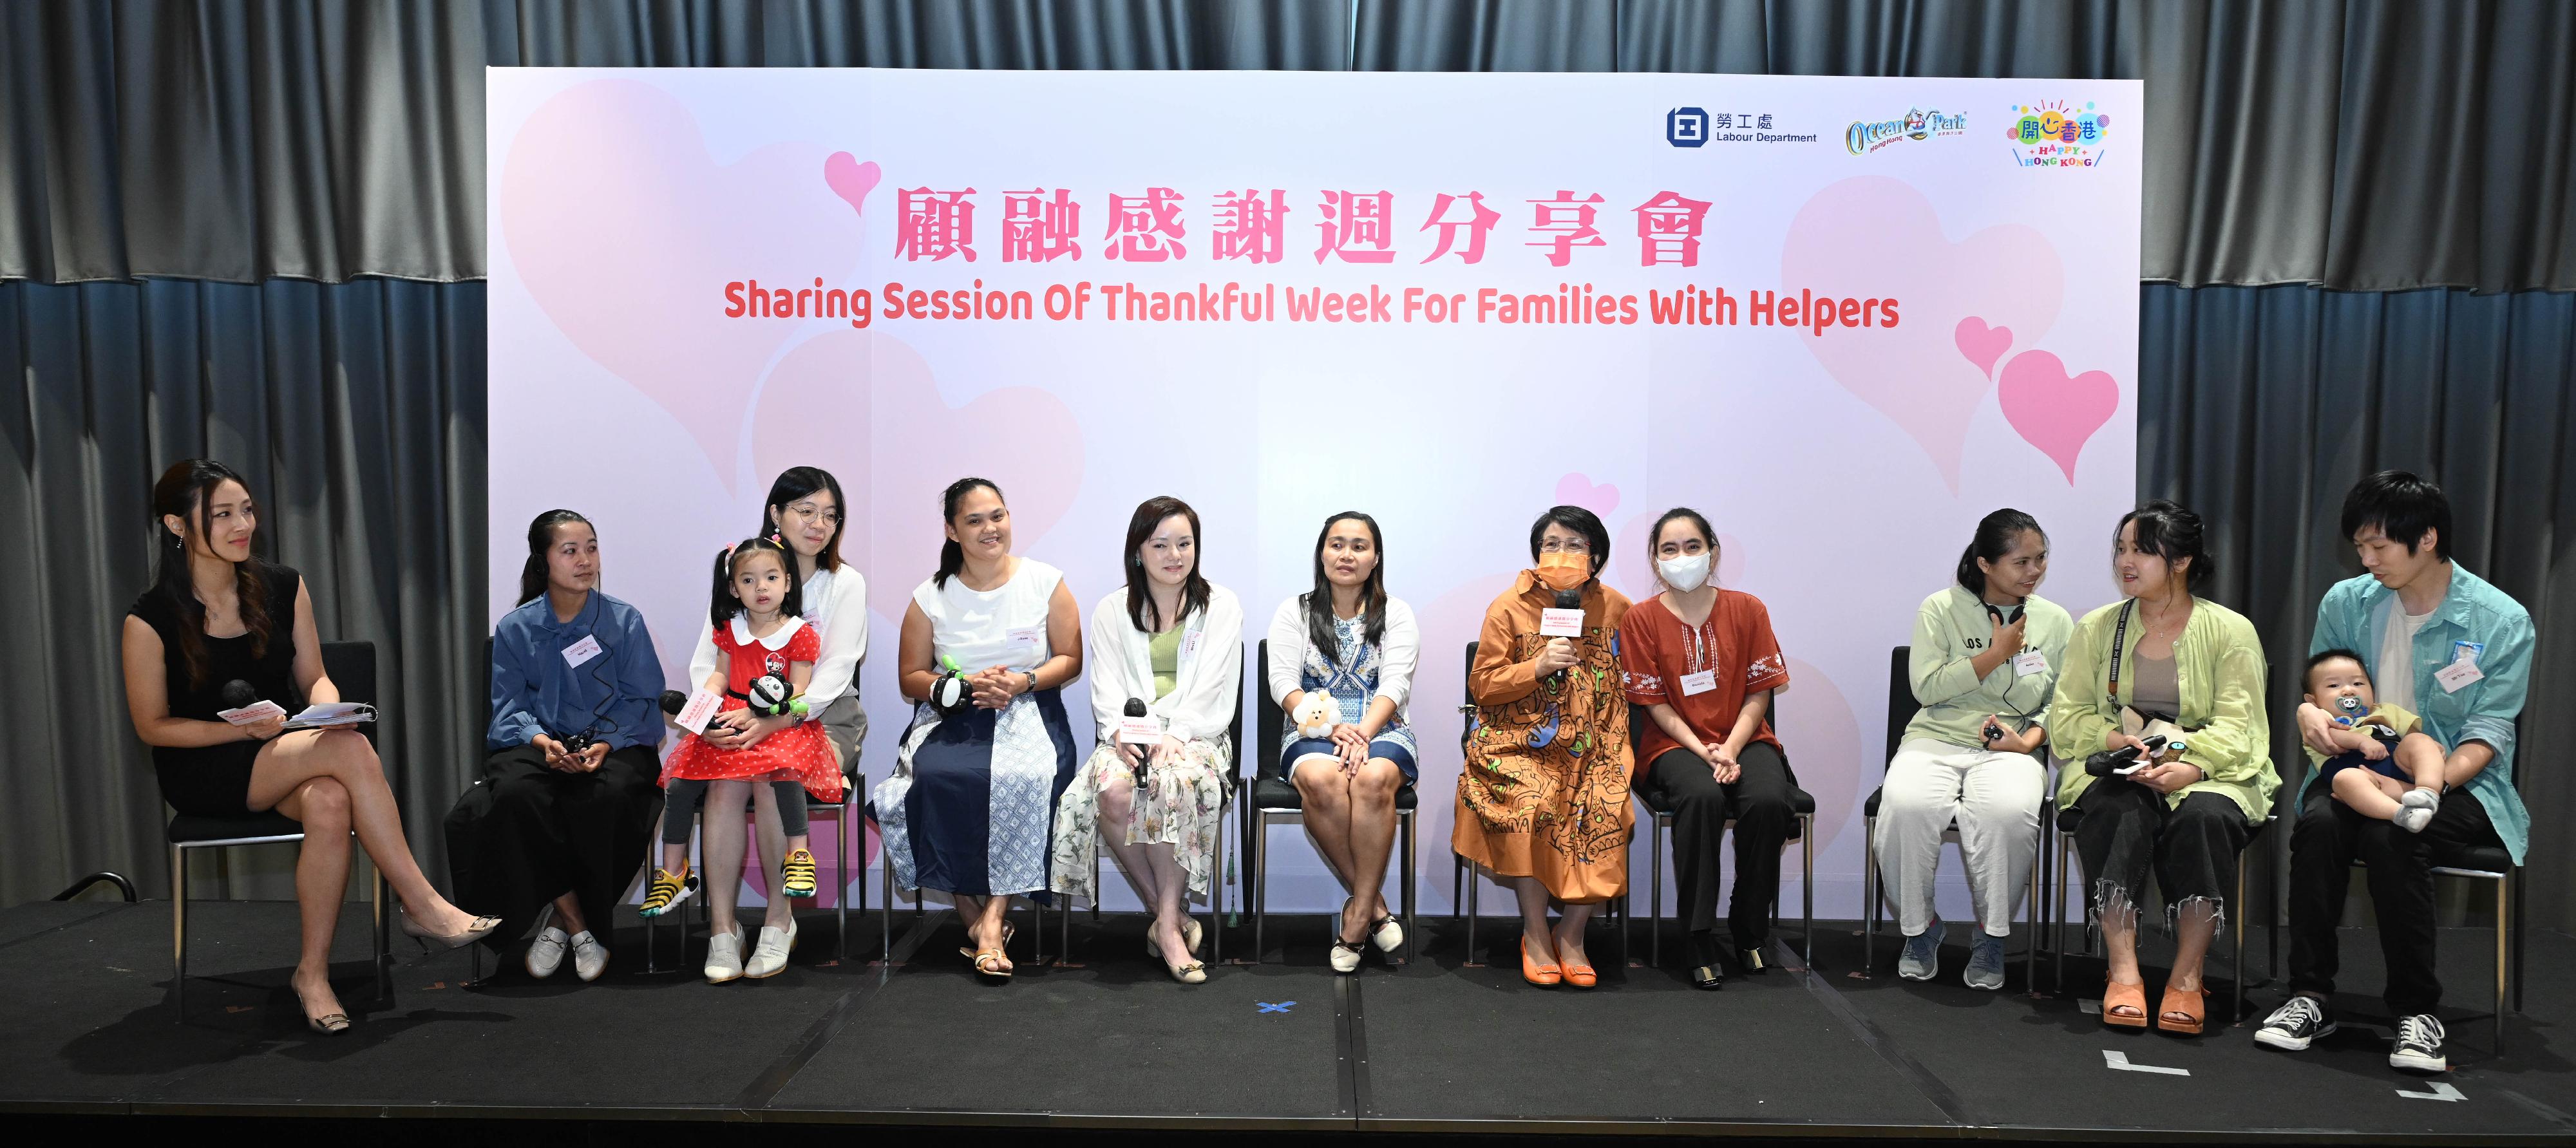 The Labour Department held a sharing session of the Thankful Week for Families with Foreign Domestic Helpers (FDHs) at M+ today (July 9). FDHs and their employers shared experiences and tips on maintaining a harmonious employment relationship.